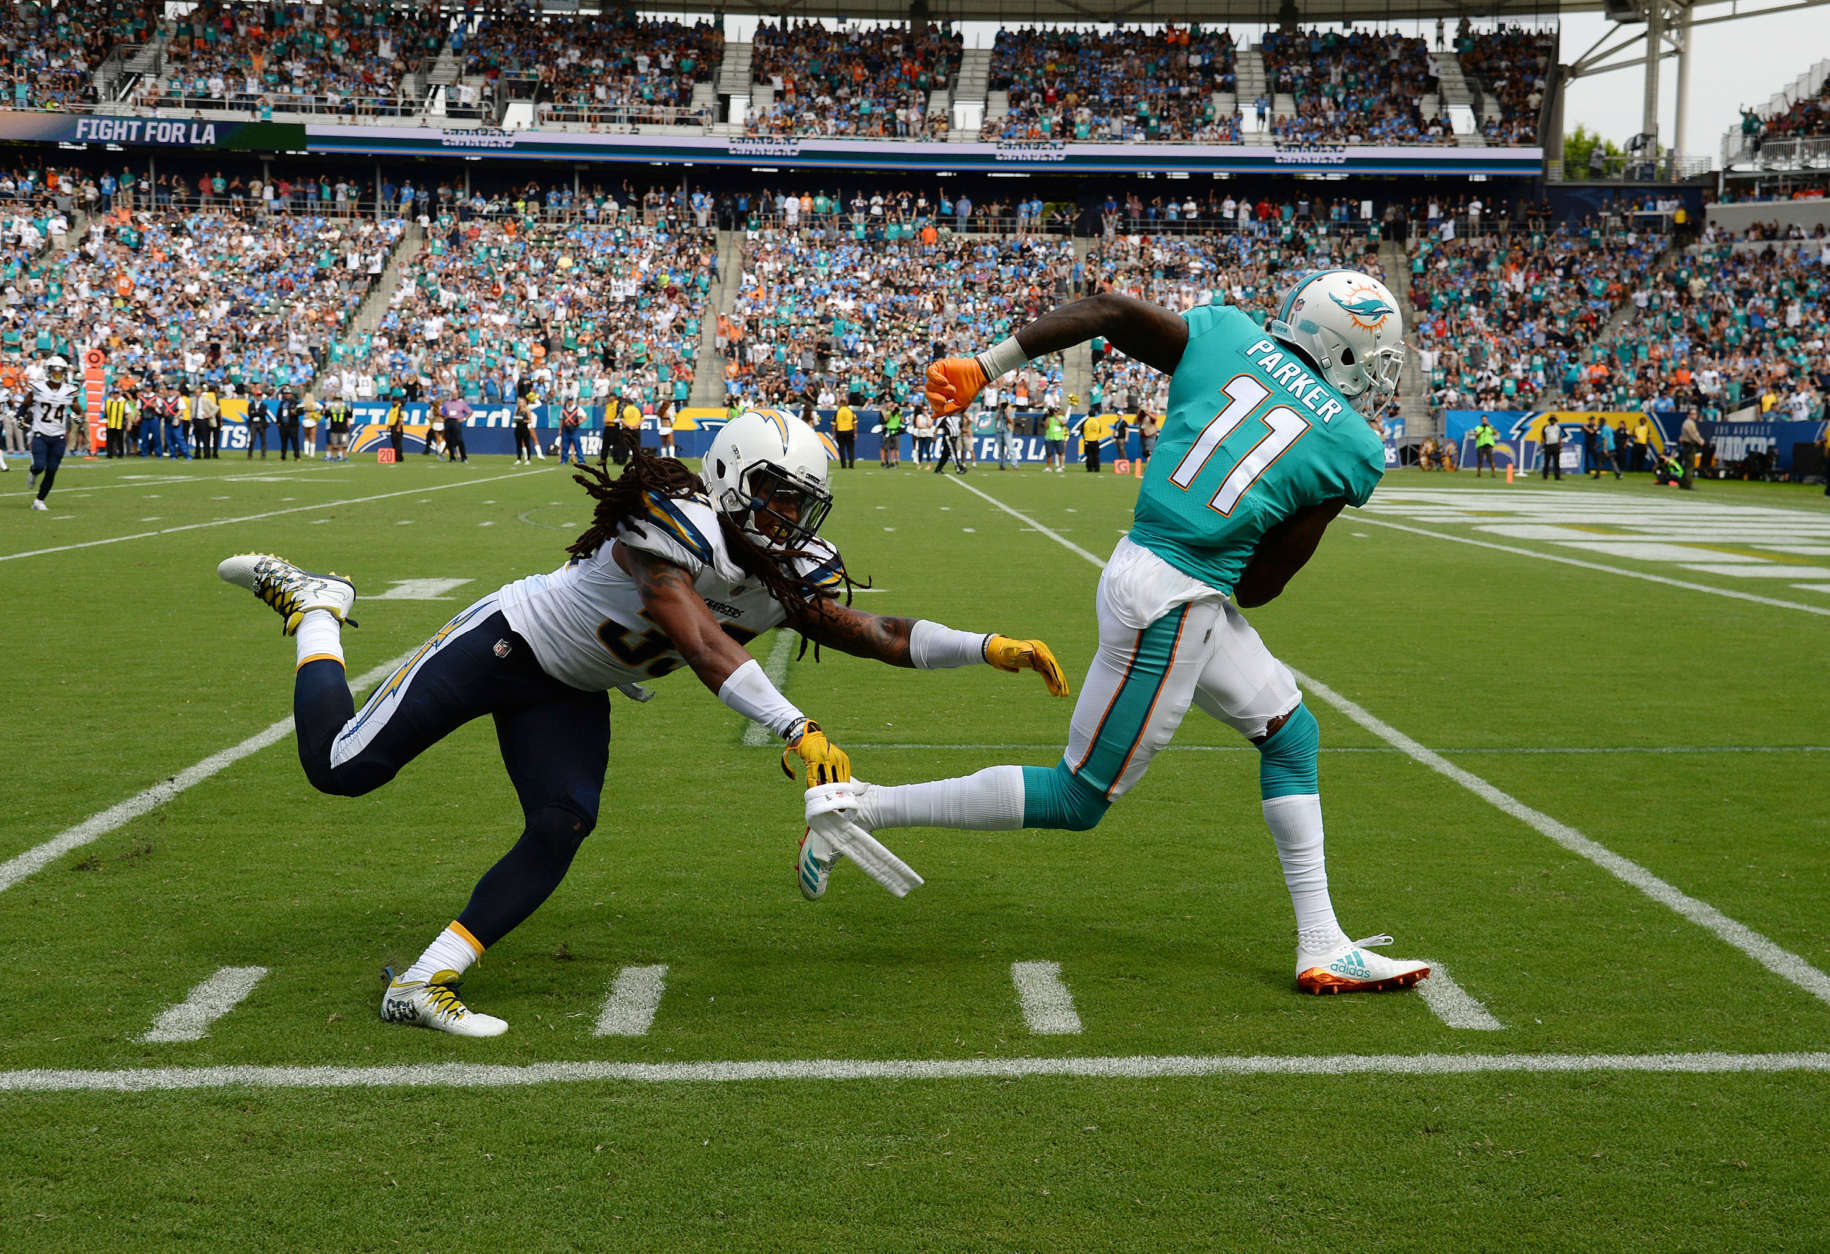 CARSON, CA - SEPTEMBER 17: Wide receiver DeVante Parker #11 of the Miami Dolphins slips past free safety Tre Boston #33 of the Los Angeles Chargers as he makes a catch and runs for big gain during the second half of their NFL game at the StubHub Center September 17, 2017, in Carson, California. (Photo by Kevork Djansezian/Getty Images)